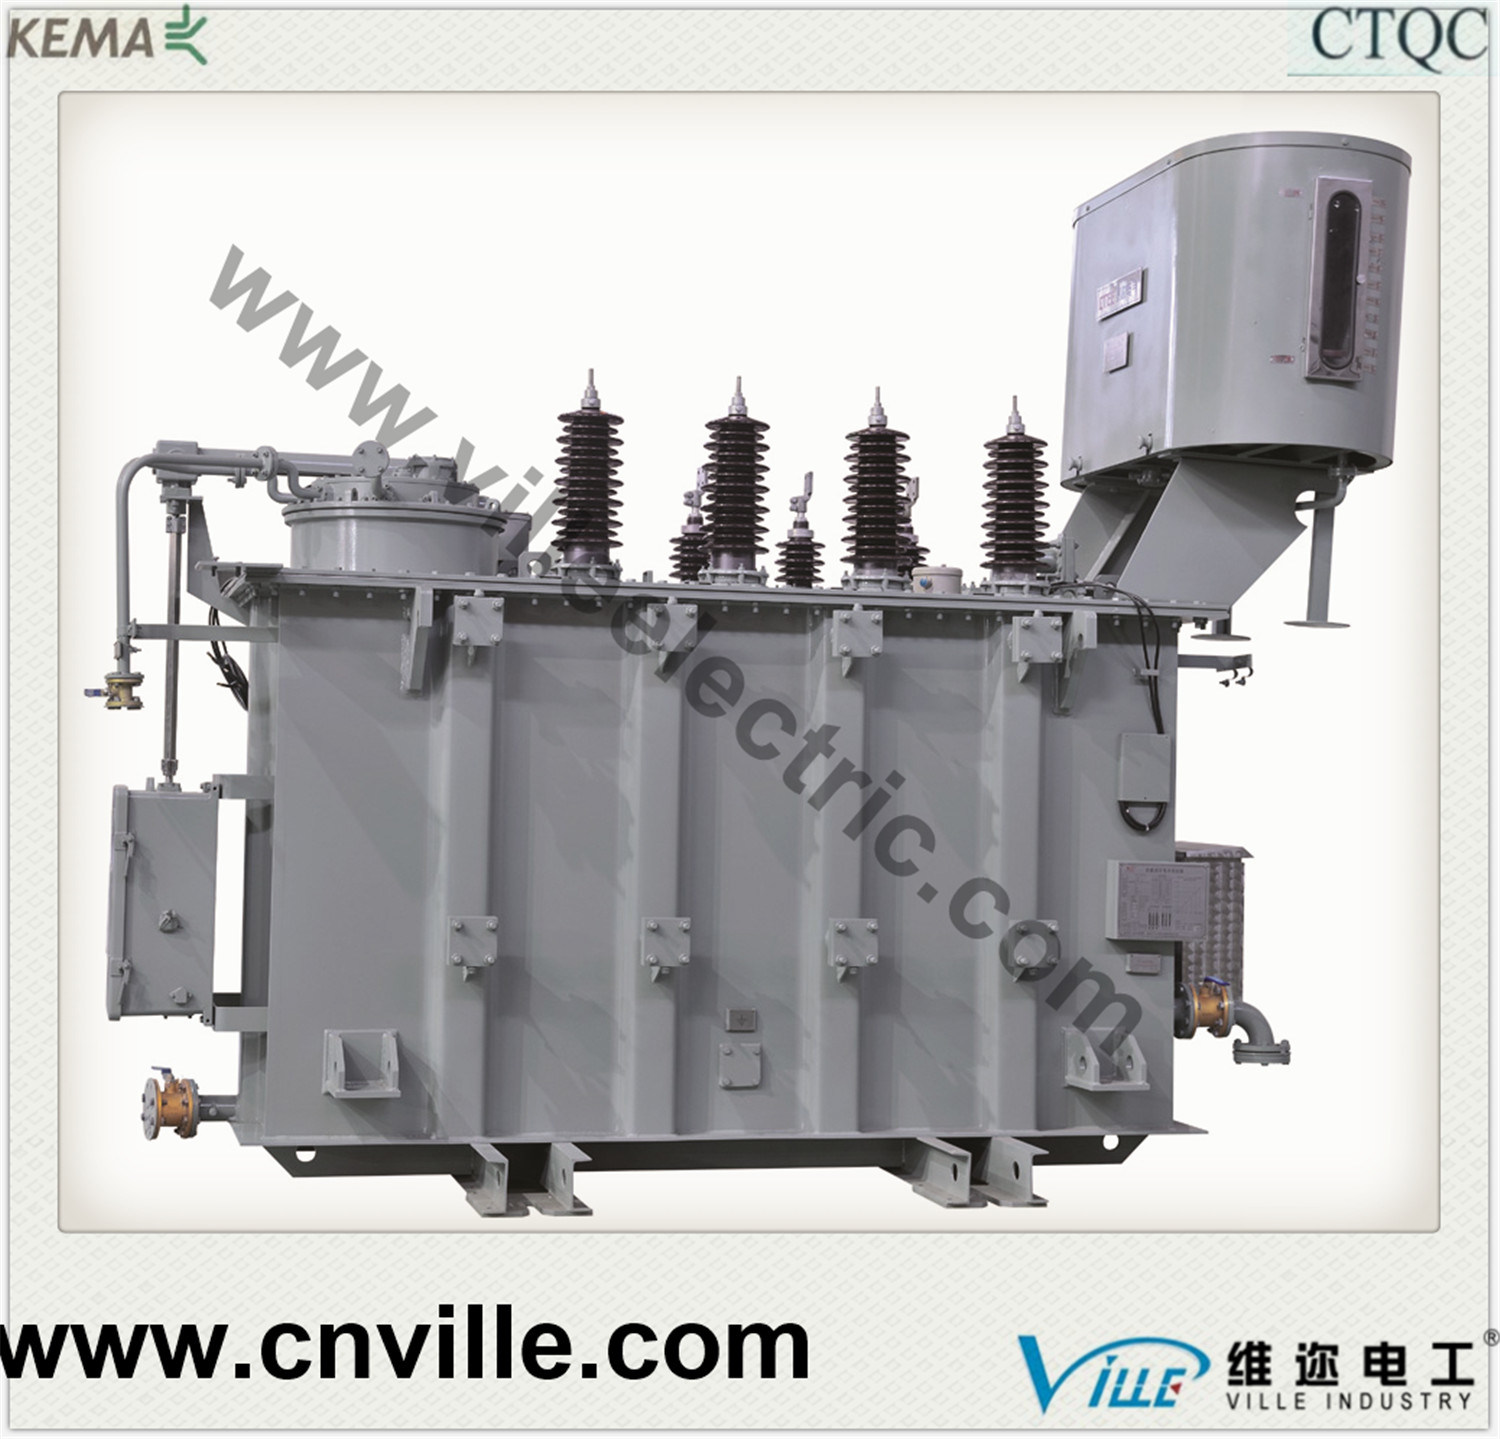 Sf-40000/69/6.3 40mva 66kv Double-Winding Power Transformers with off-Circuit Tap Changer Distribution Transformer